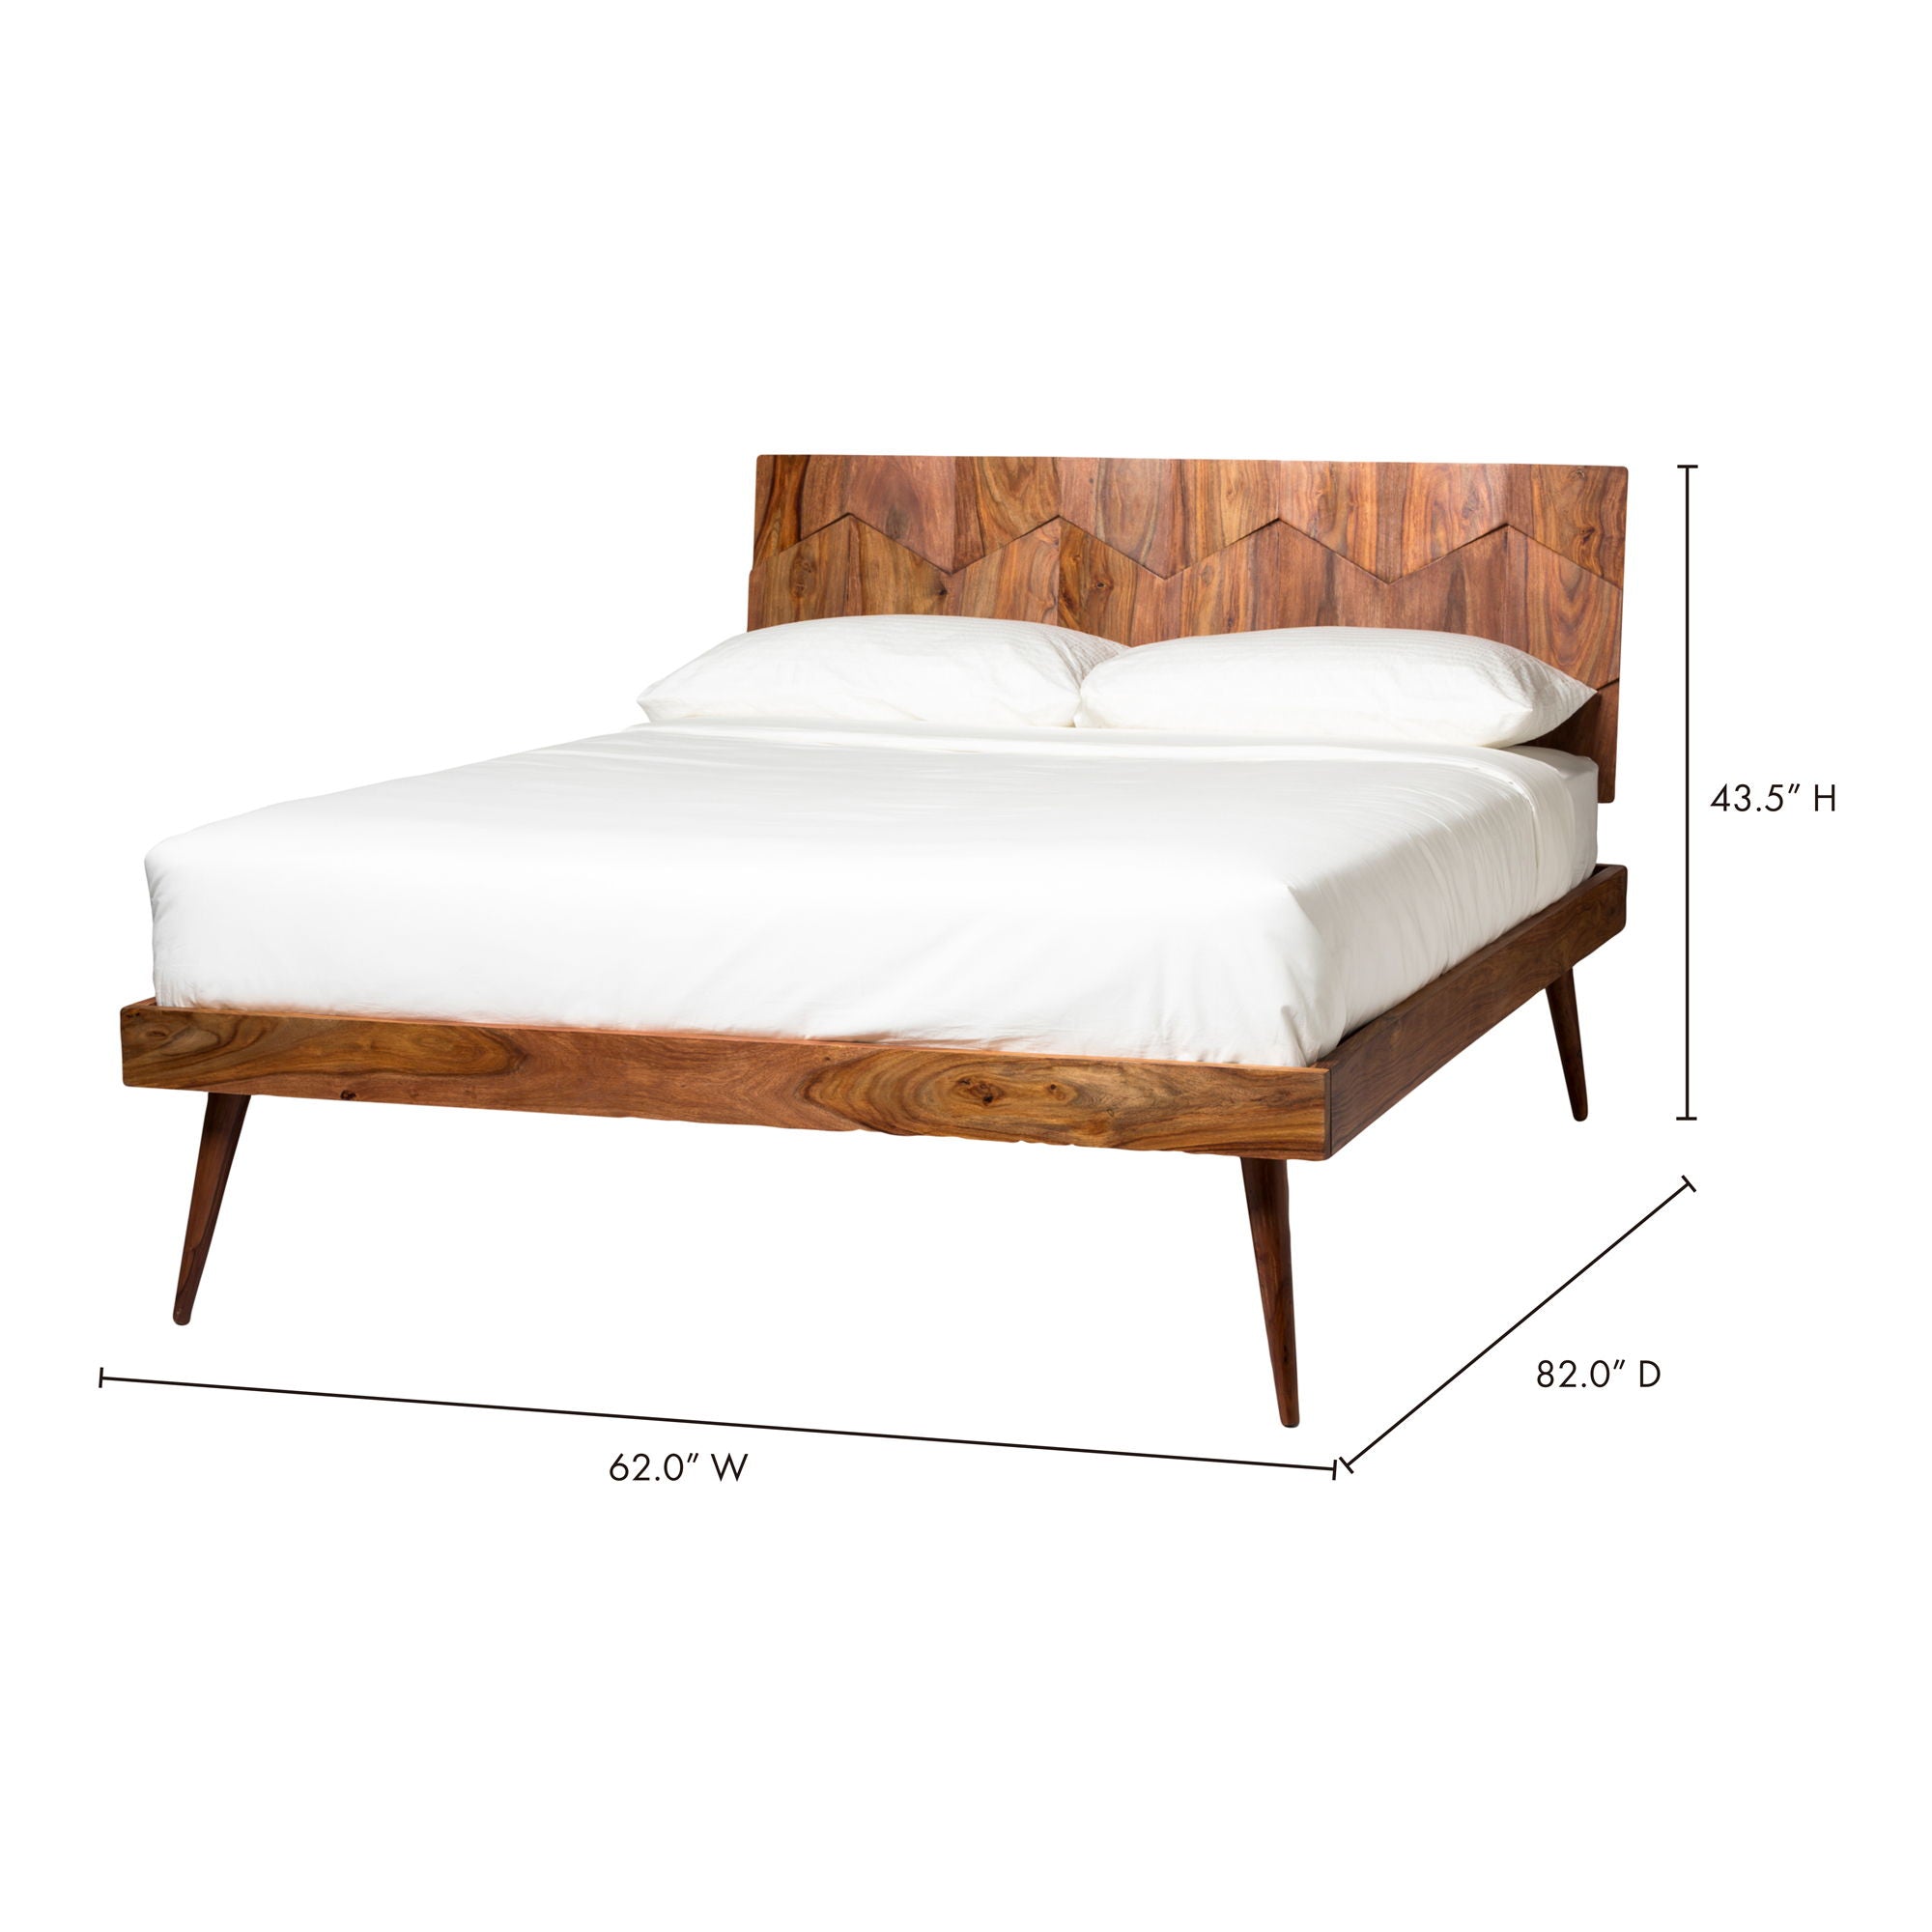 O2 - Queen Bed - Natural